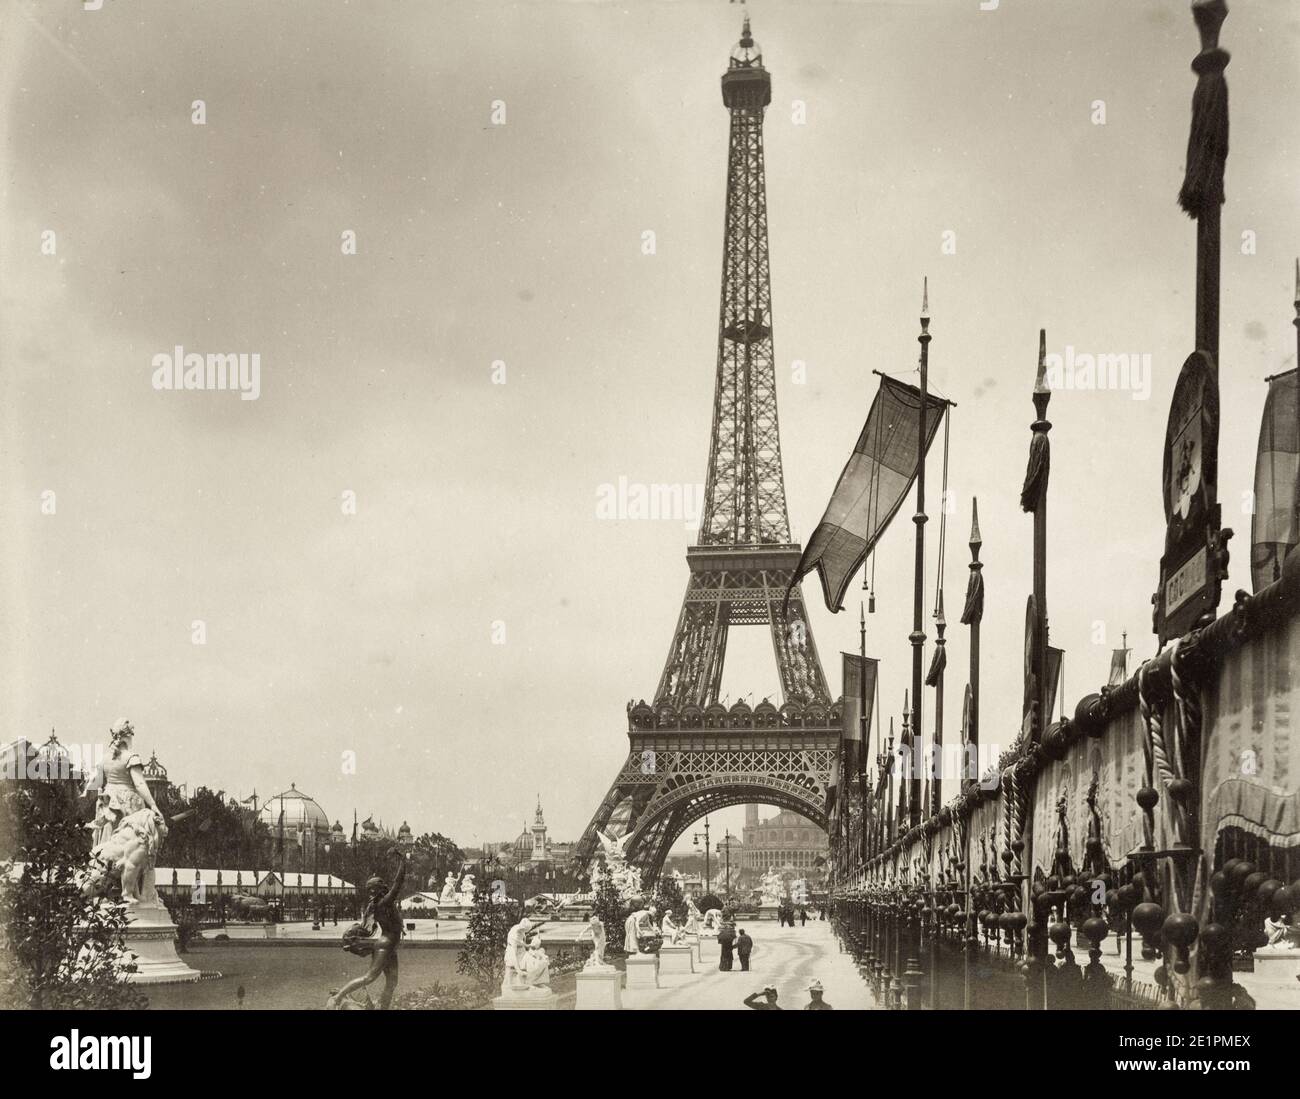 Vintage 1900 century photograph: Eiffel Tower Paris, recently completed and seen at the time of the Exposition Universelle. The Exposition Universelle of 1900, better known in English as the 1900 Paris Exposition, was a world's fair held in Paris, France, from 14 April to 12 November 1900, to celebrate the achievements of the past century and to accelerate development into the next. Stock Photo